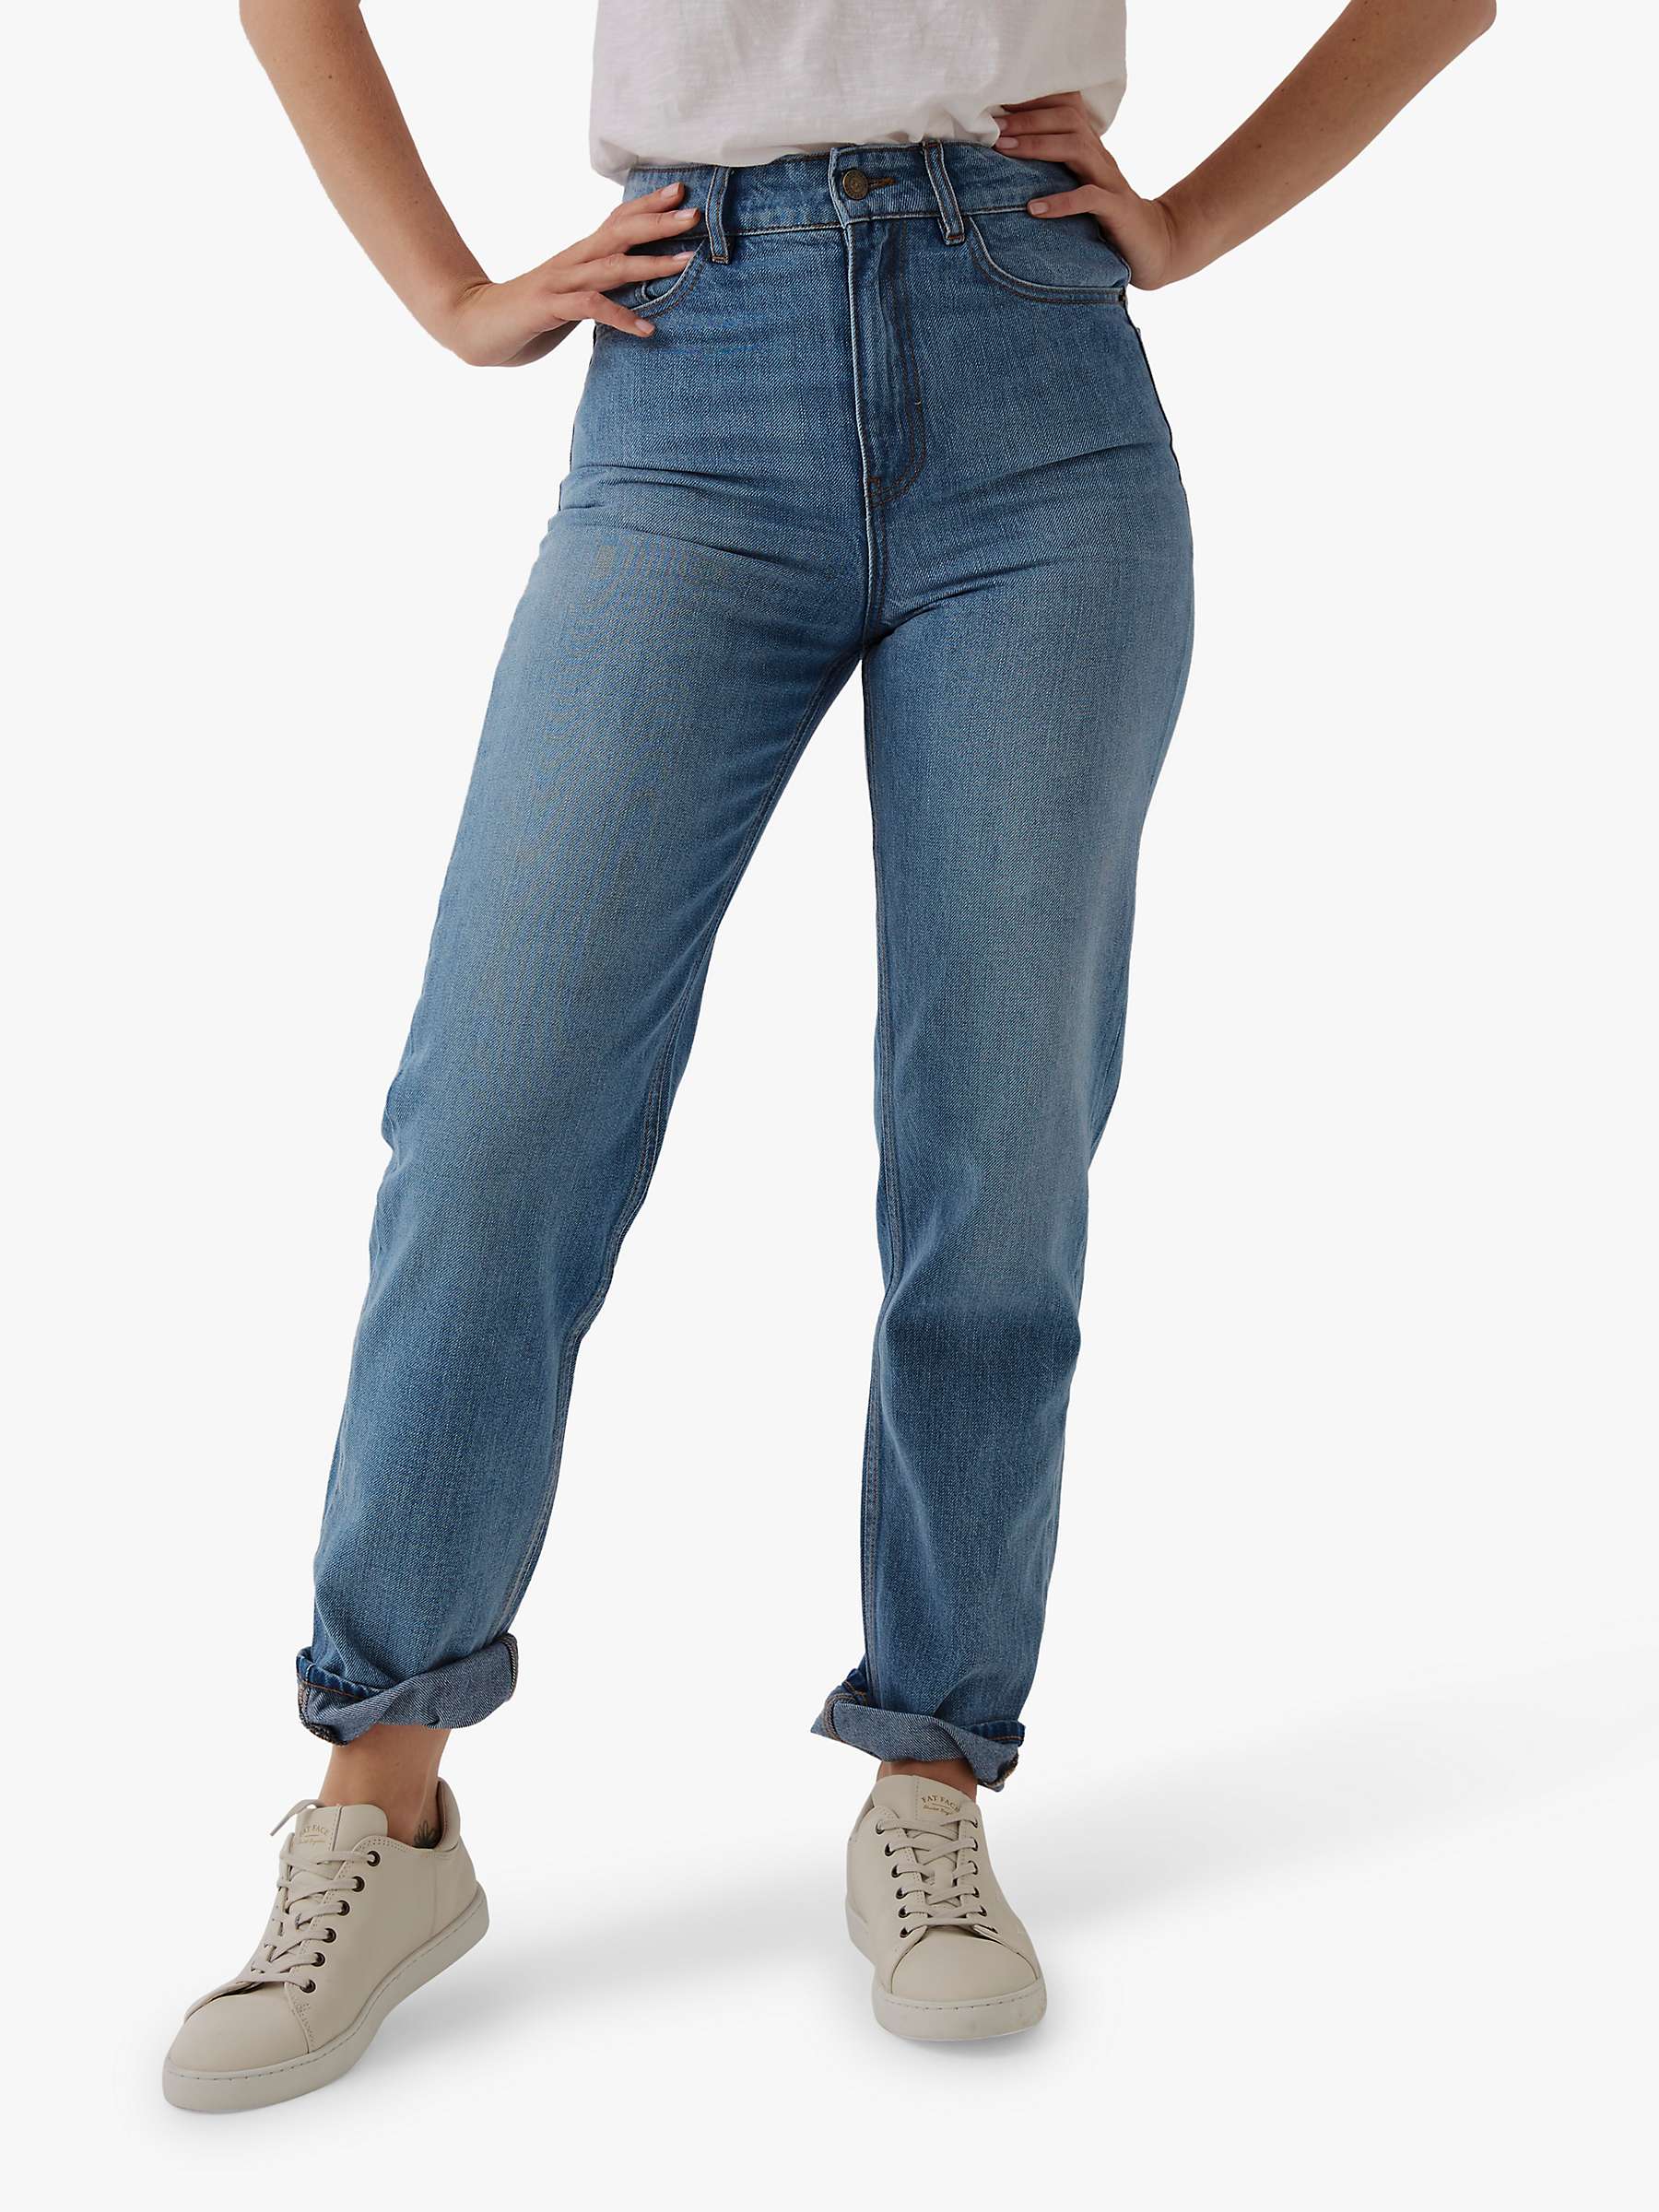 Buy FatFace Mom Fit Jeans, New Pale Online at johnlewis.com